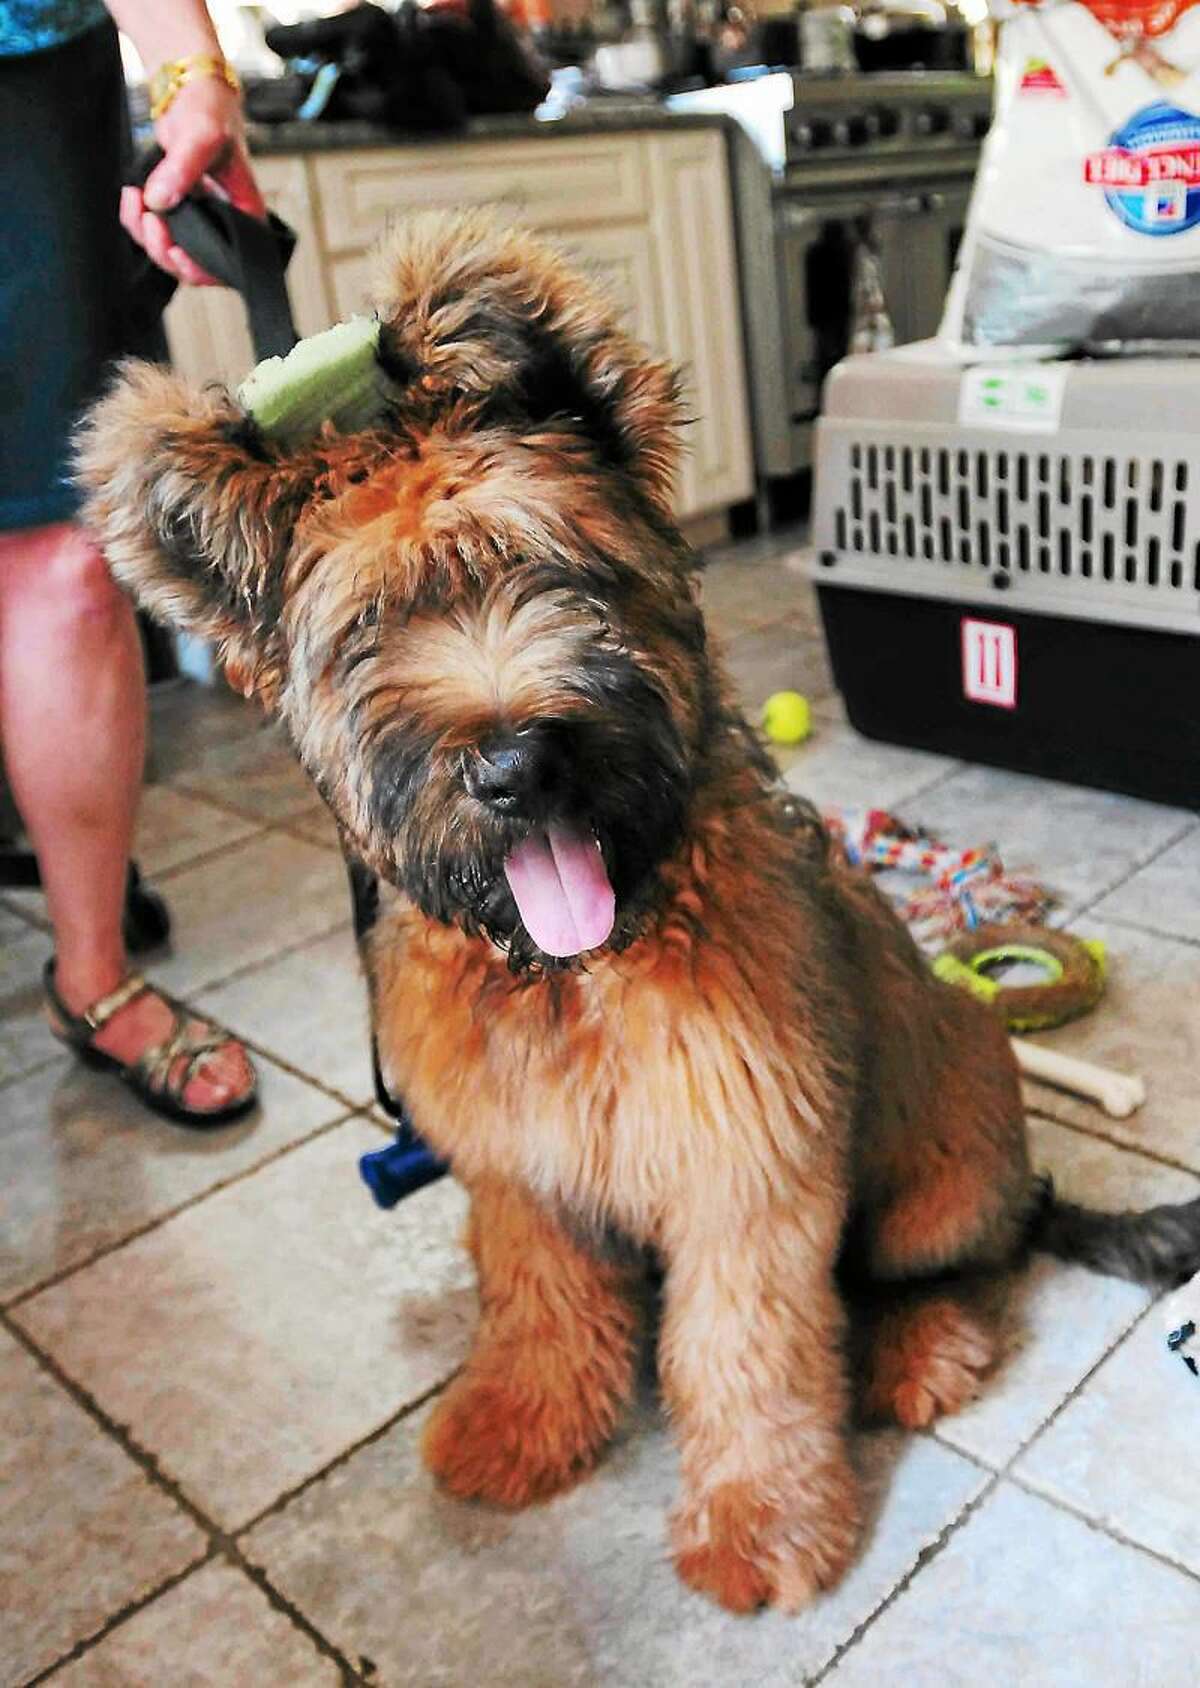 Phineas, a four-month old Briard dog whose owner, Victoria Morrow, was bitten by an unleashed dog. Morrow, who did not want to be in a photograph, criticizes New Haven Animal Shelter supervisor New Haven Police officer Stephanie Johnson for not protecting the public from dangerous unleashed dogs.